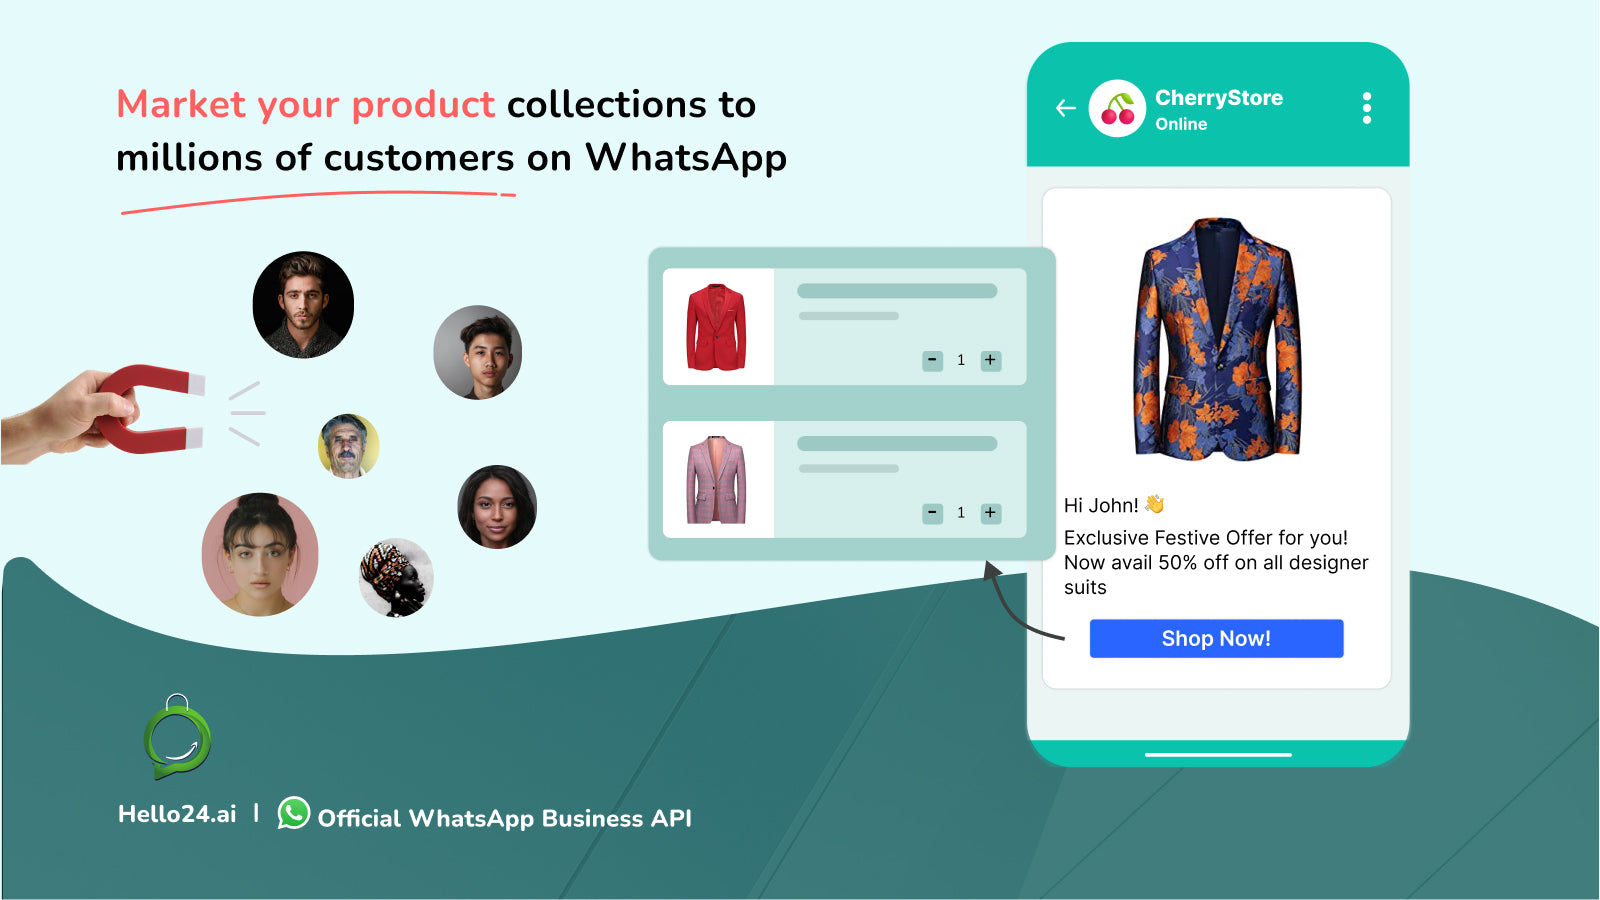 Market your products to millions of customers on WhatsApp